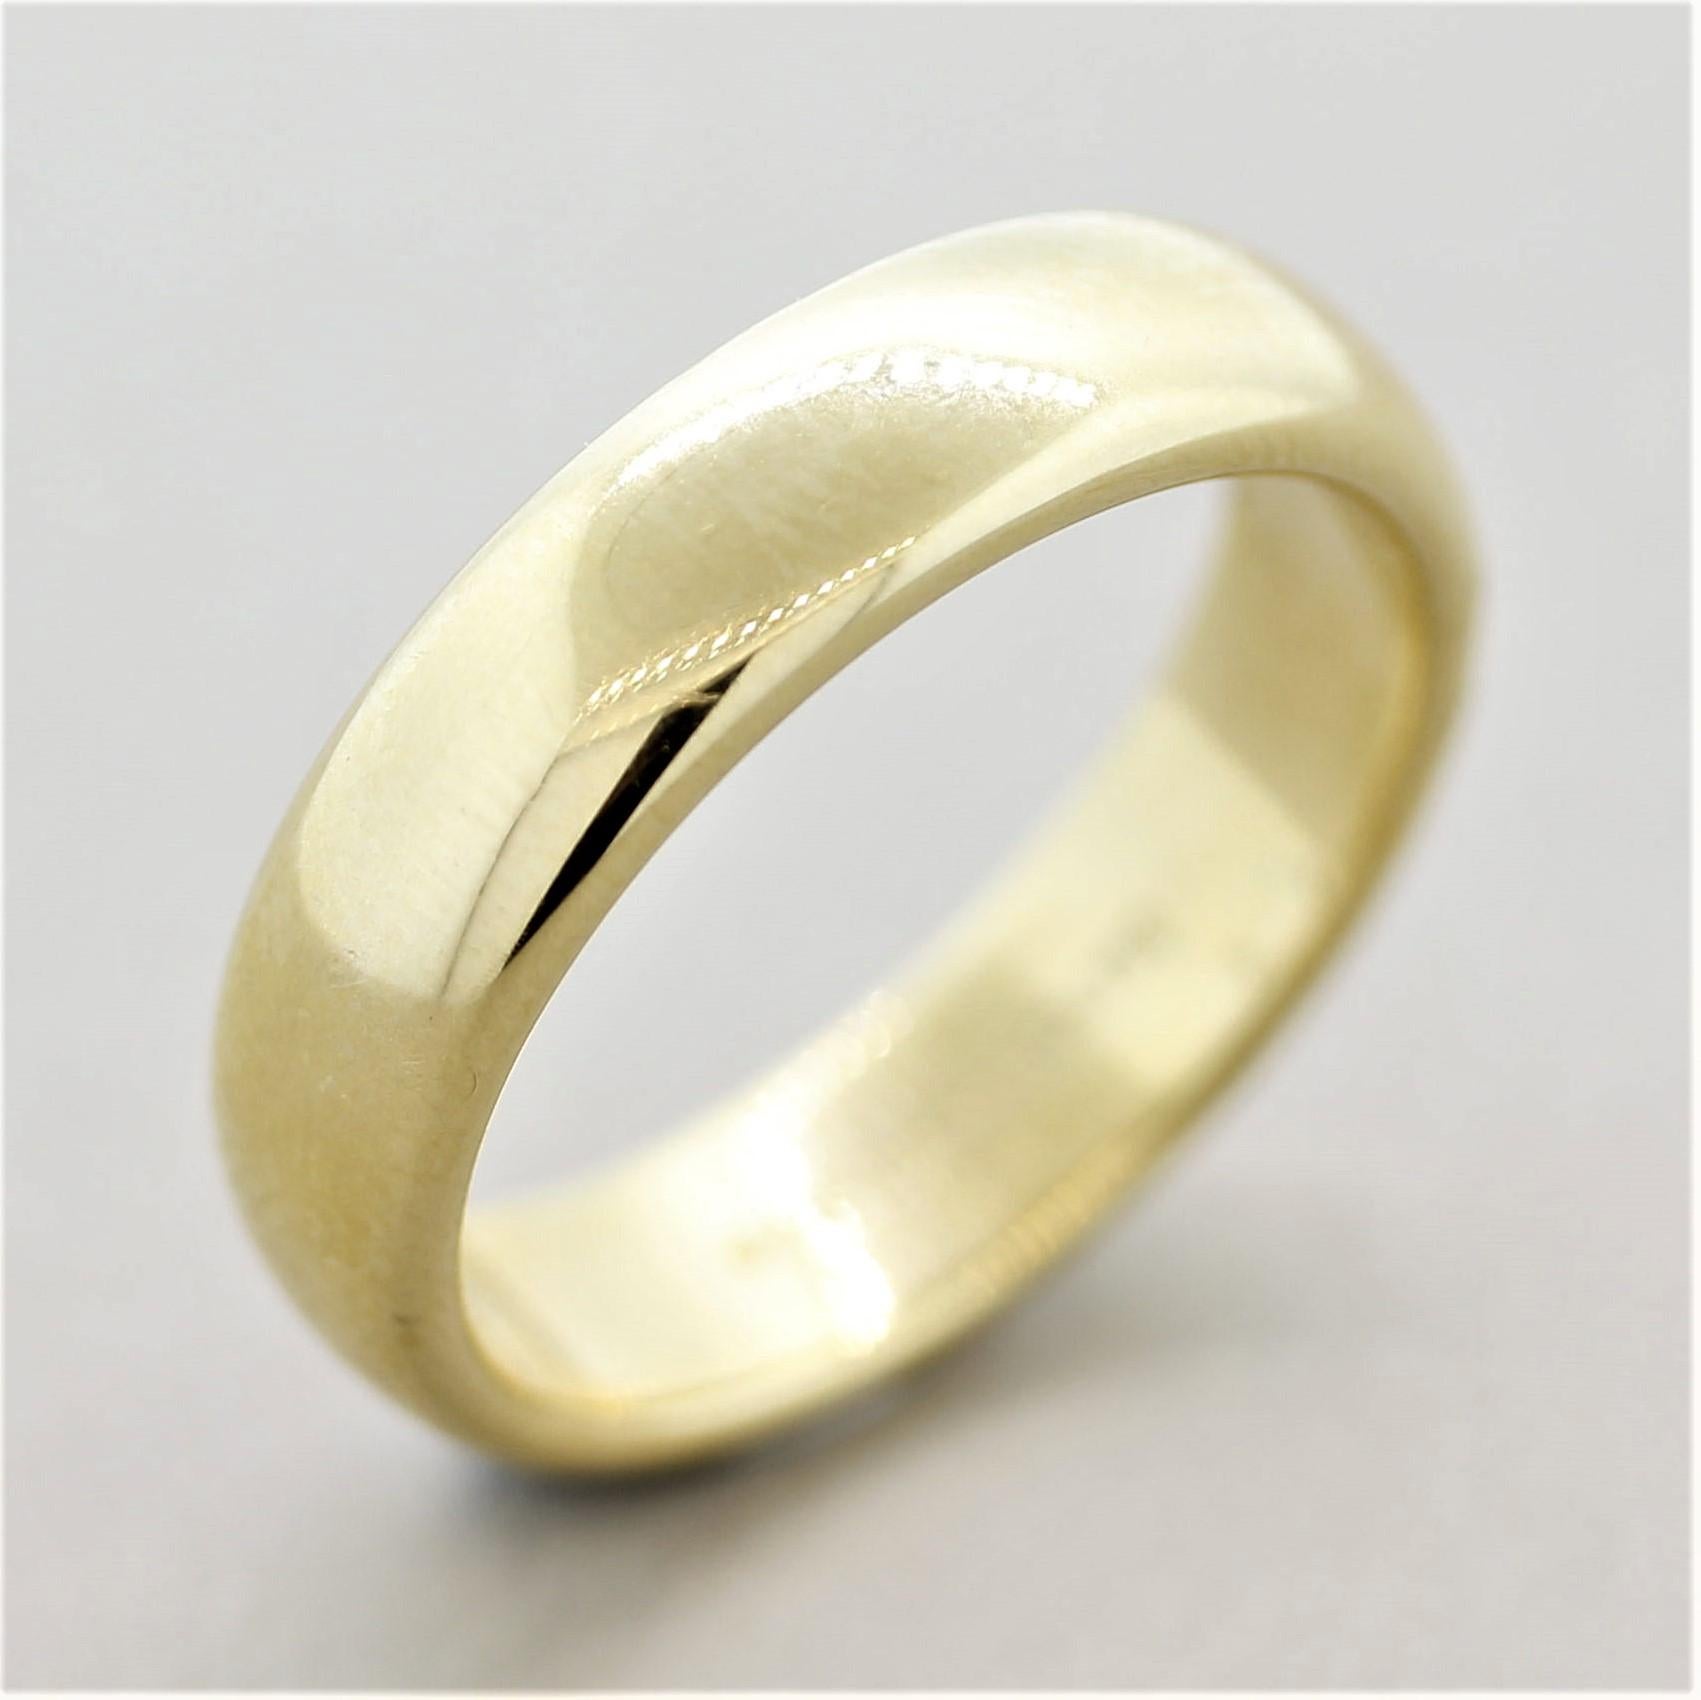 A classic men’s band by famed American jeweler Tiffany & Co. Made in 18k yellow gold with a comfort fit design, this band can be worn all day in comfort!

Ring Size 10.75